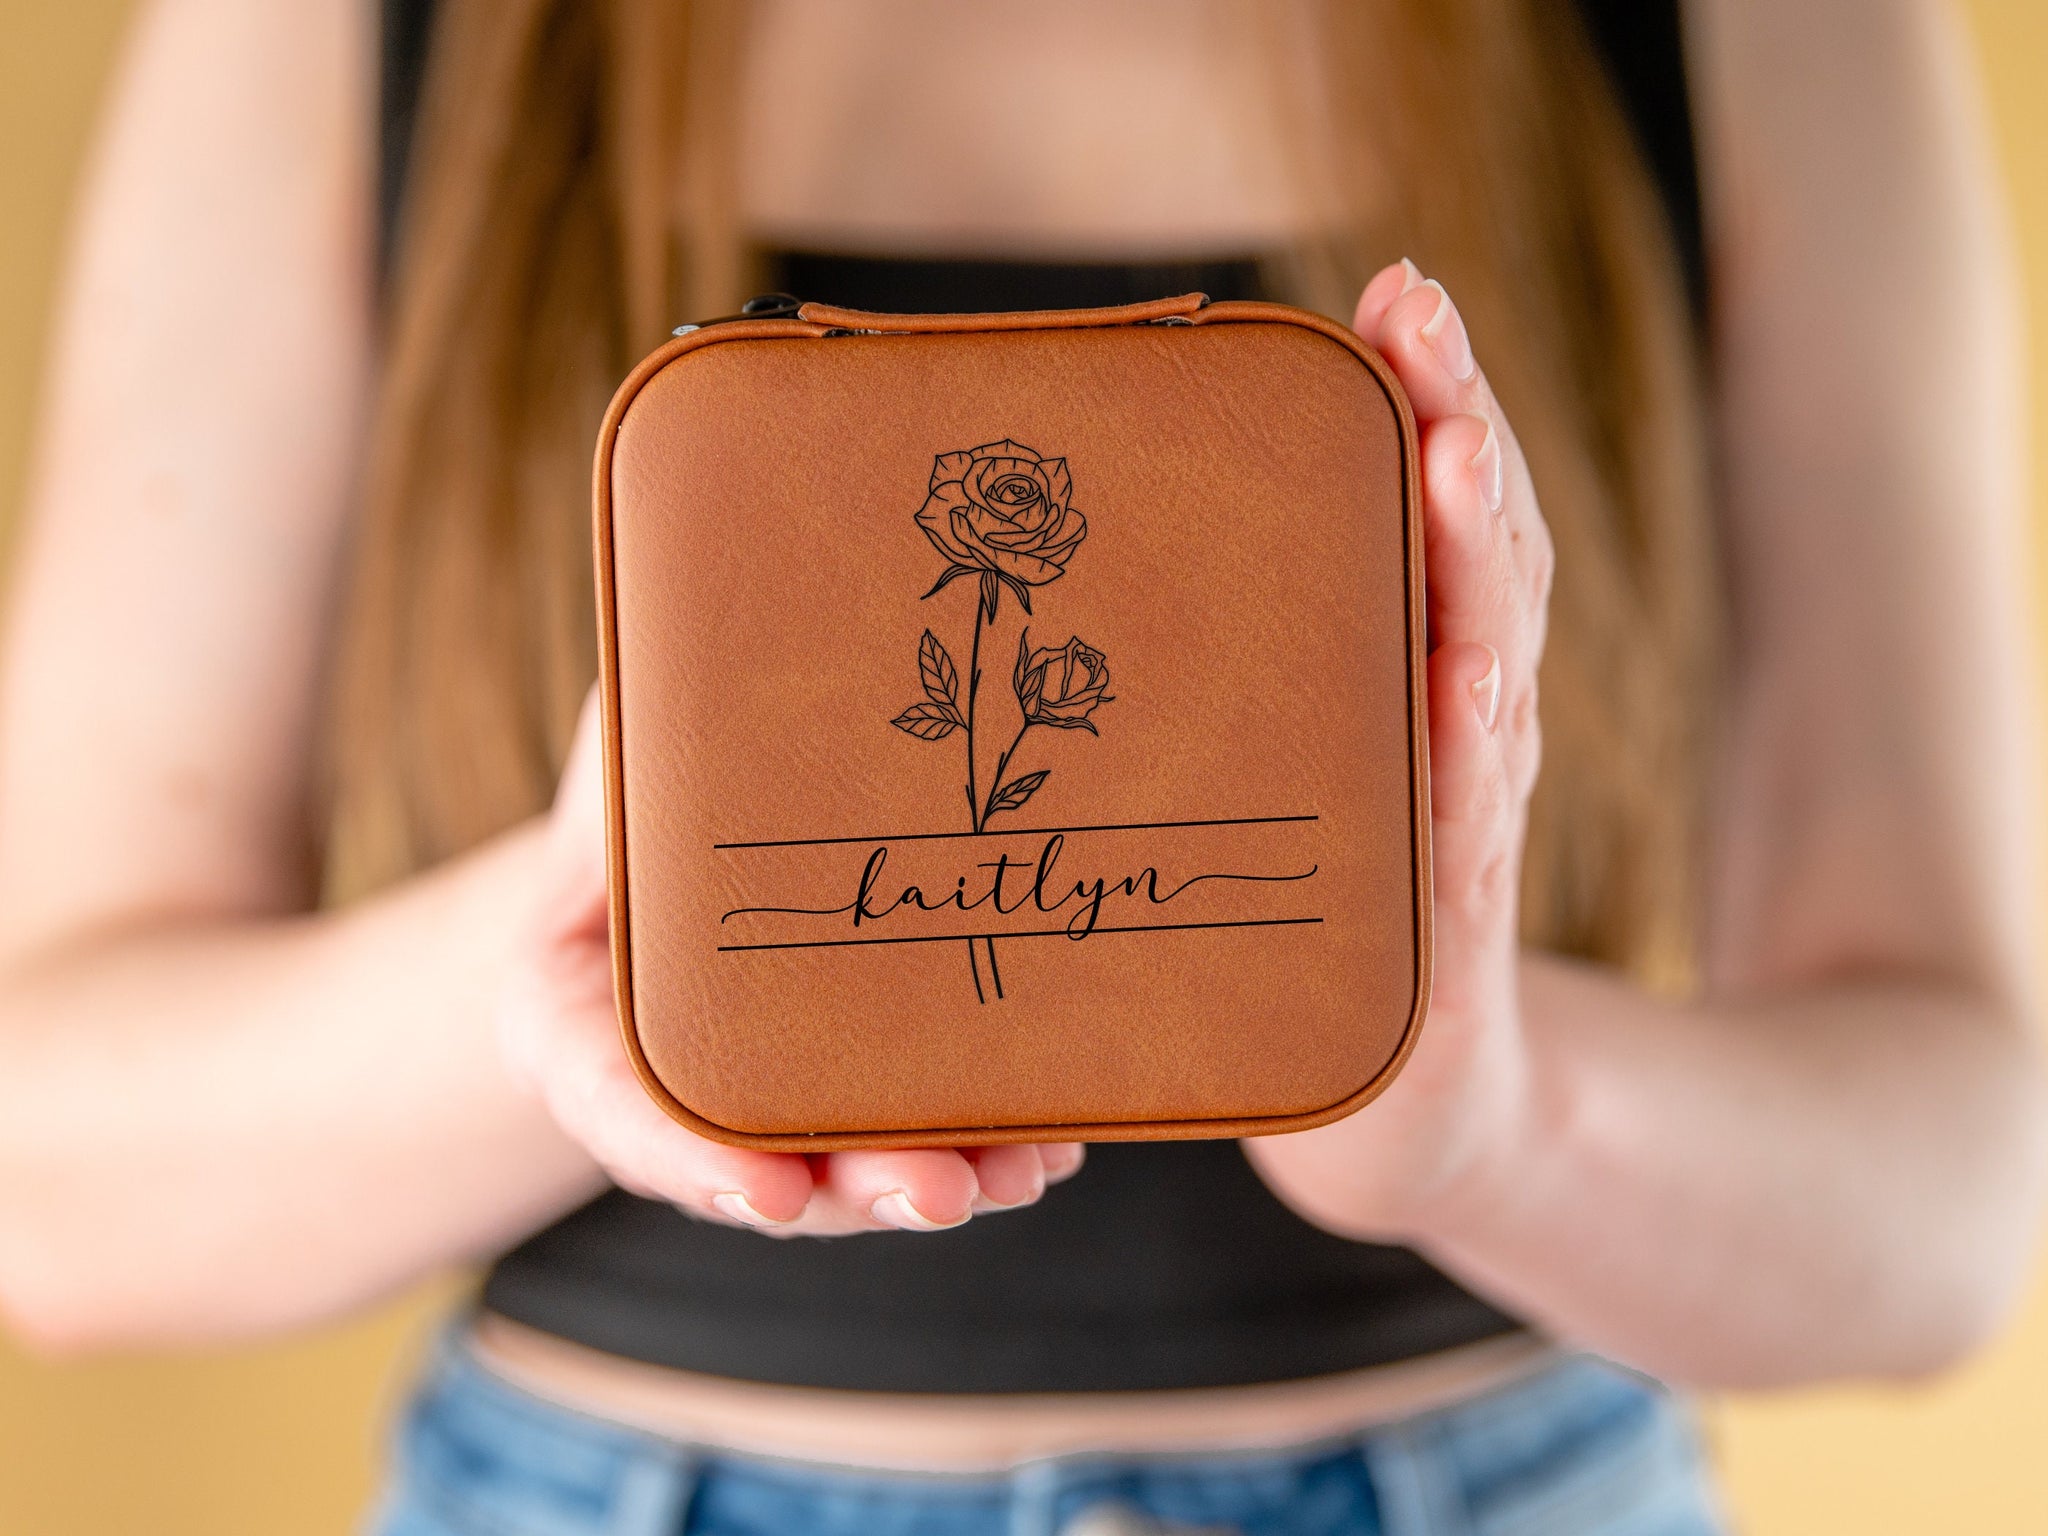 Personalized Birth Flower Gift for Her, Compact Mirror, Travel Jewelry Case, Vegan Leather Wallet, Anniversary Gift Set for Her